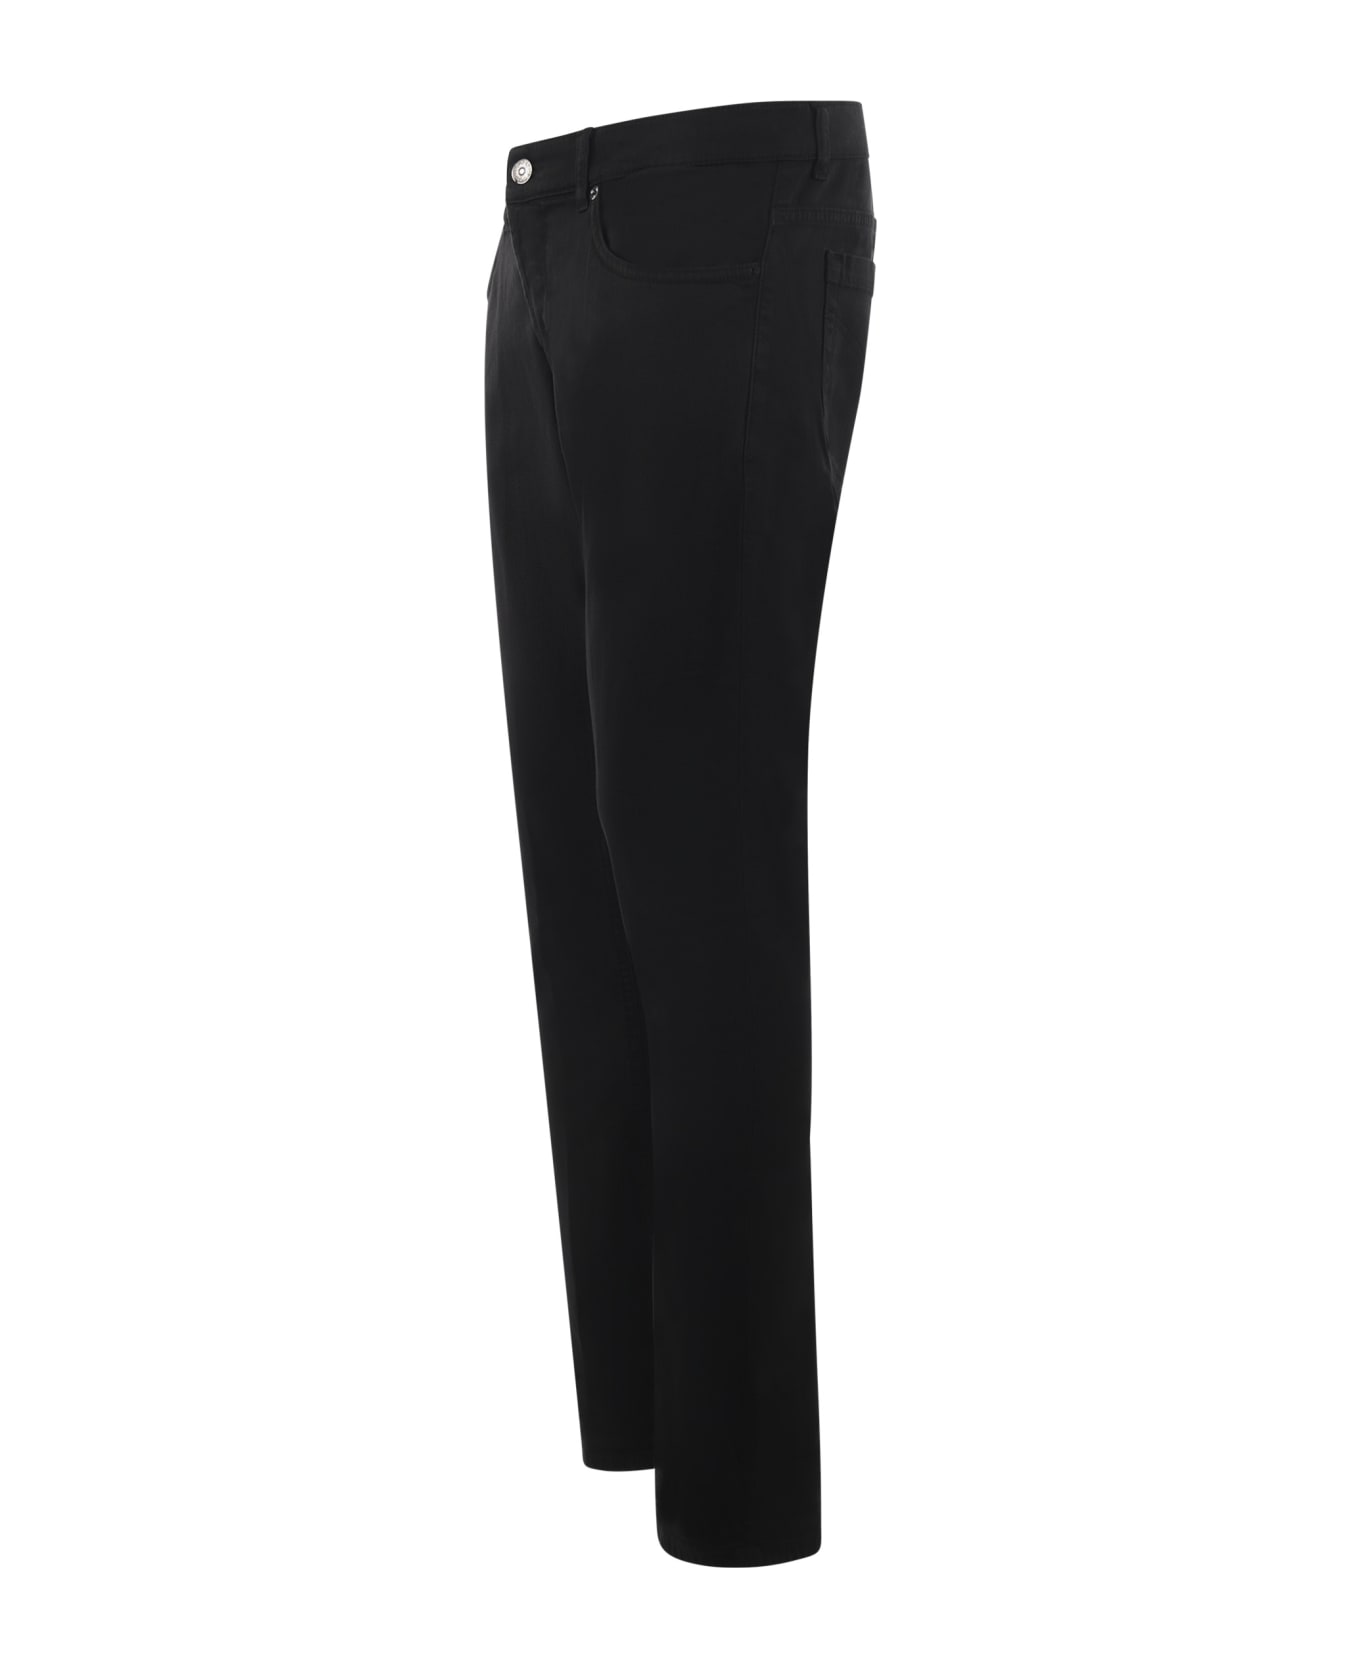 Dondup Concealed Skinny Trousers Dondup - Black